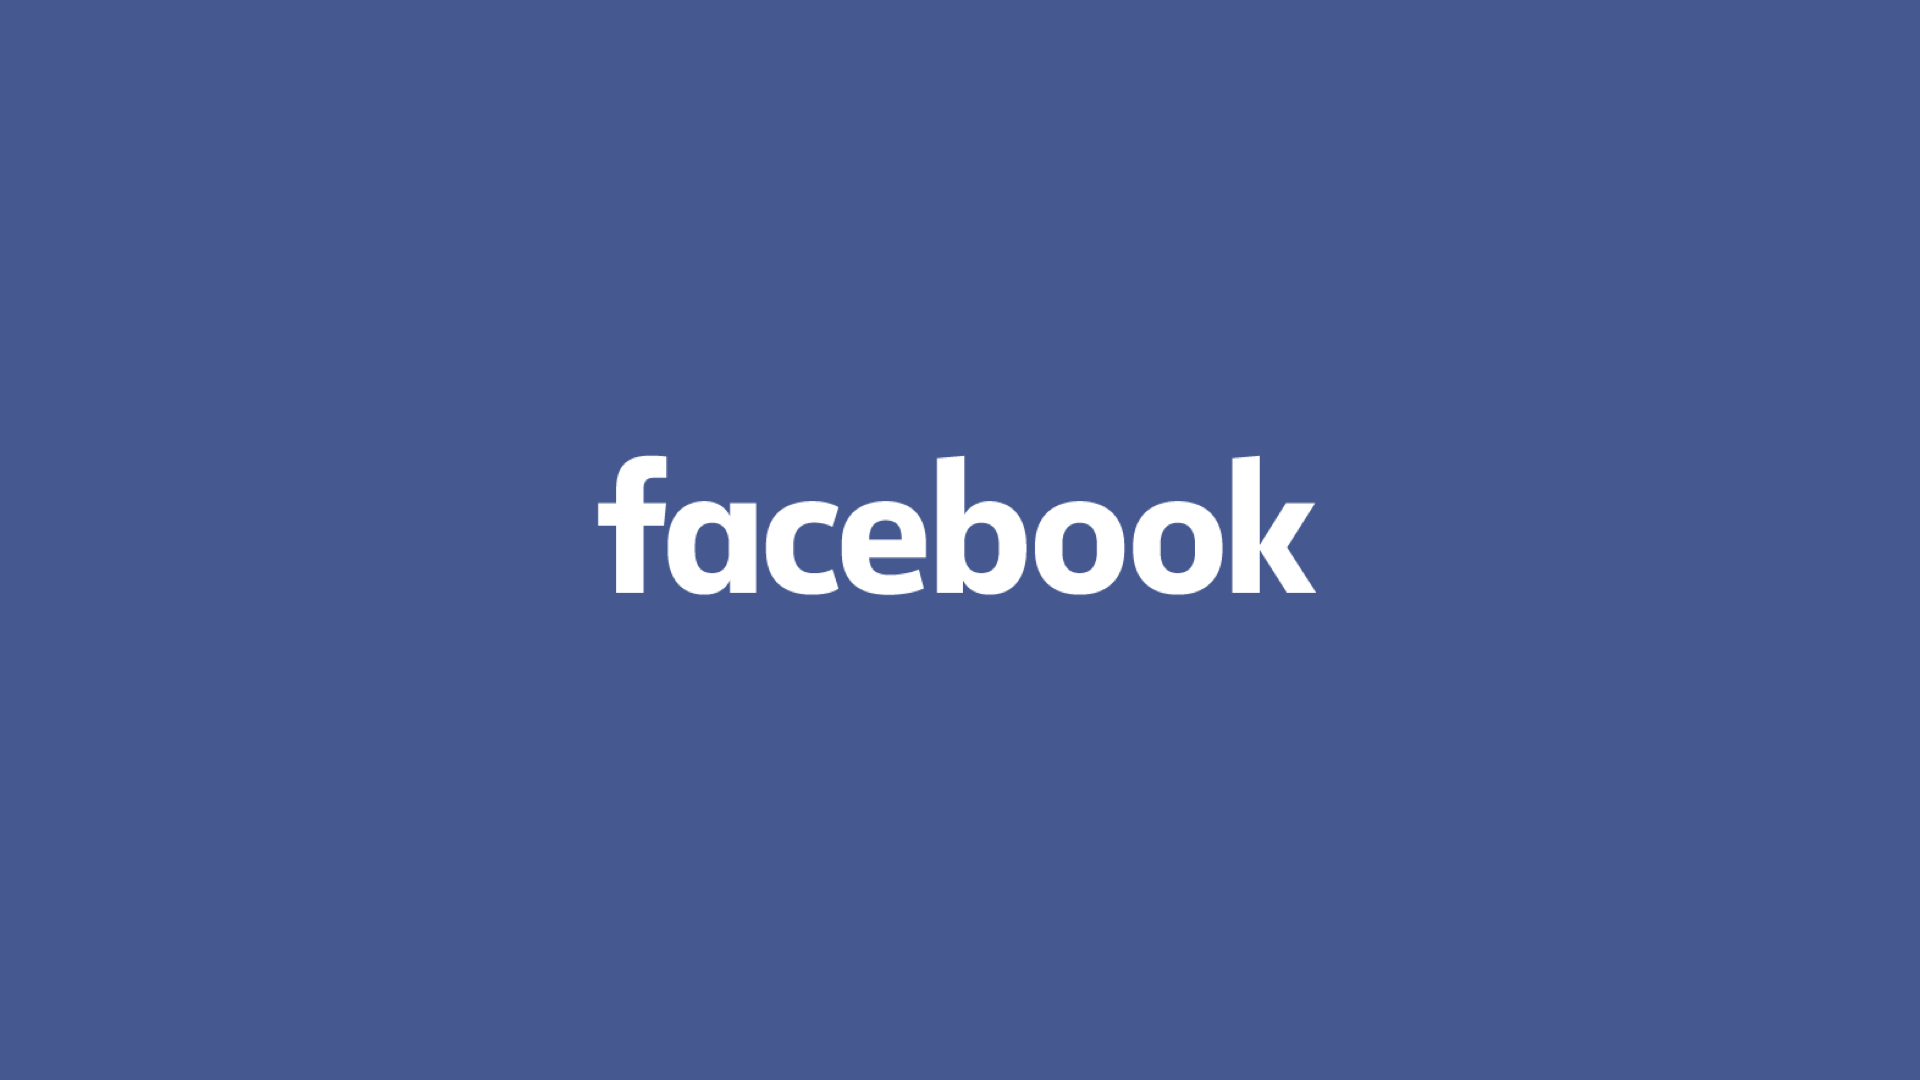 Let's Clear Up a Few Things About Facebook's Partners - About Facebook